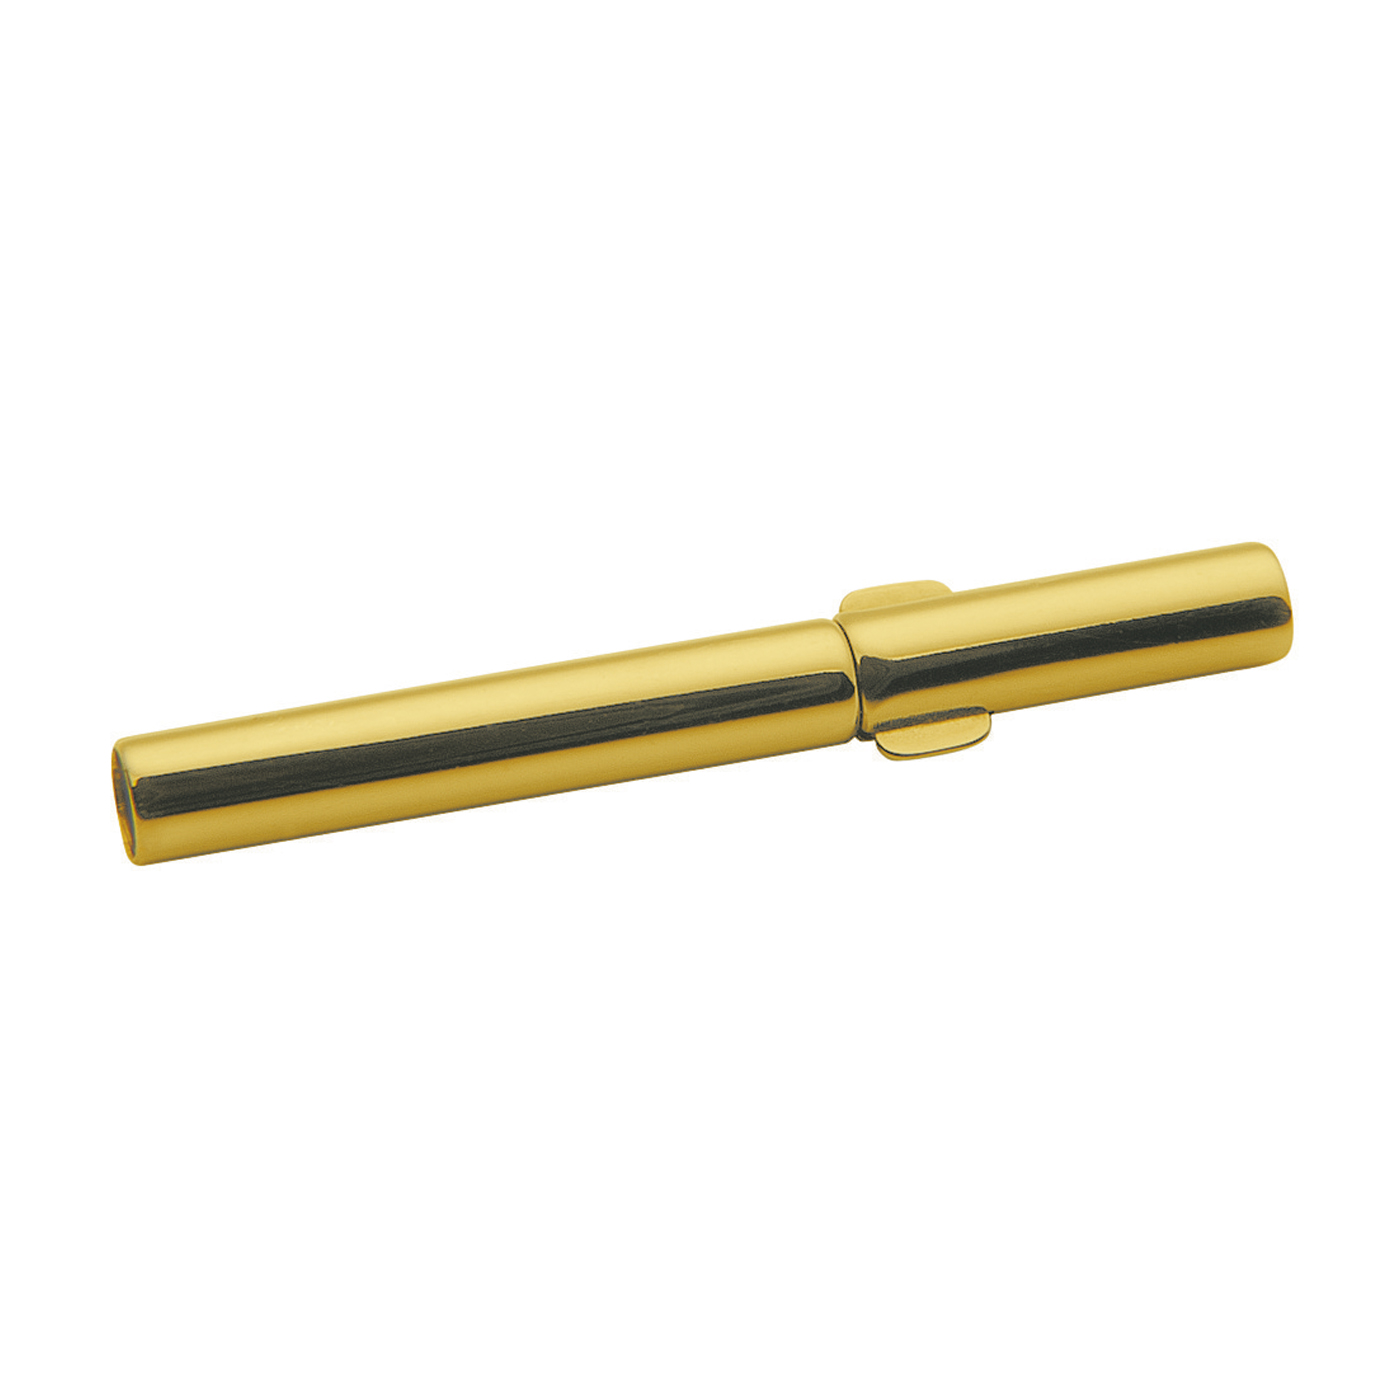 Double Clip Clasp, Stainless Steel Gold-Pl., ø 2.5 x 2.1 mm - 1 piece